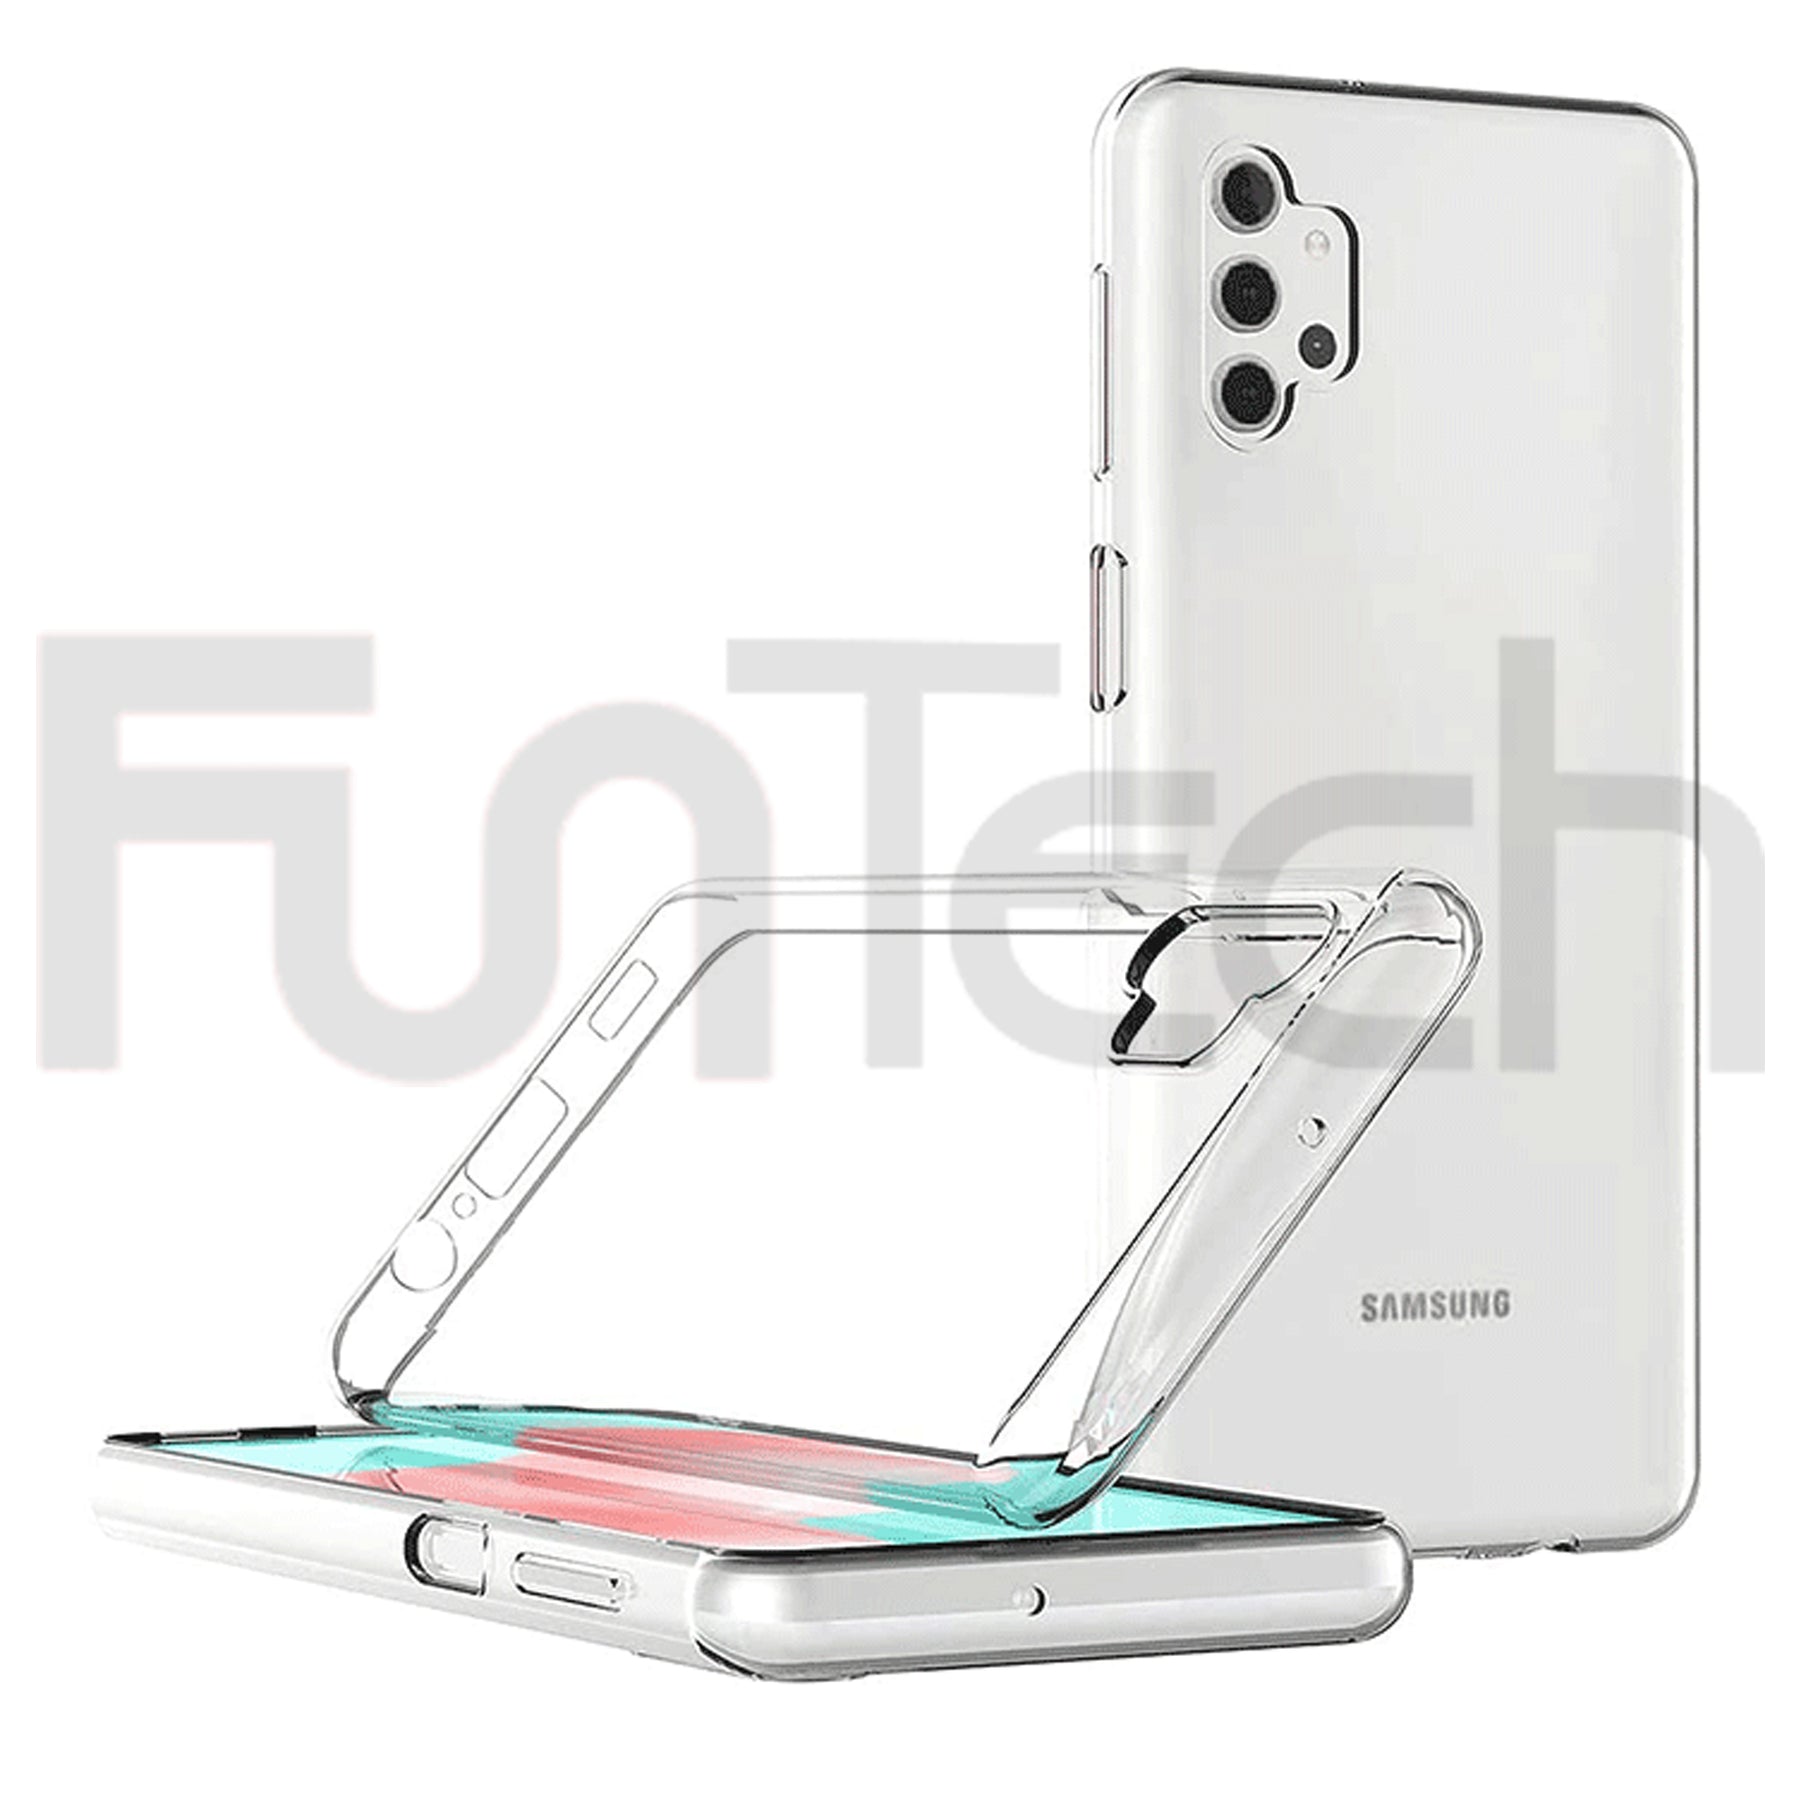 Samsung A32 5G, Case, Color Clear.